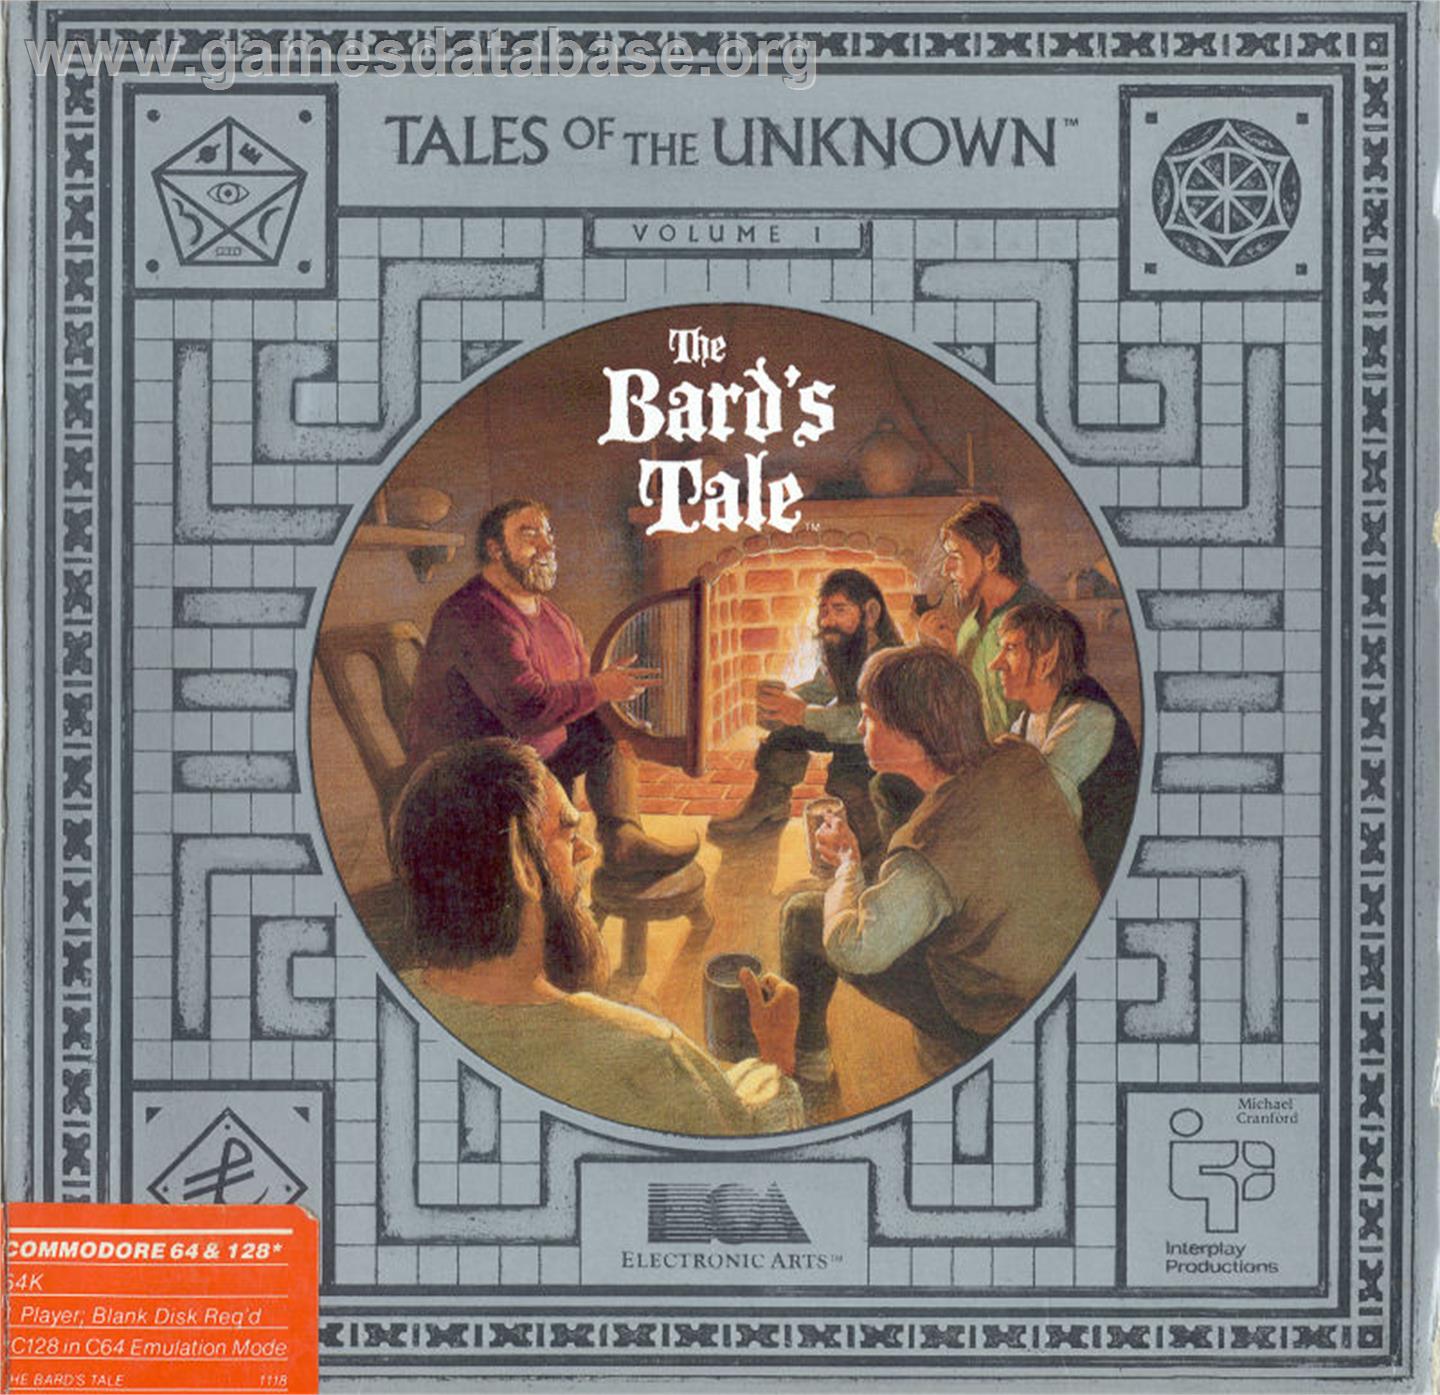 Tales of the Unknown, Volume I: The Bard's Tale - Commodore 64 - Artwork - Box